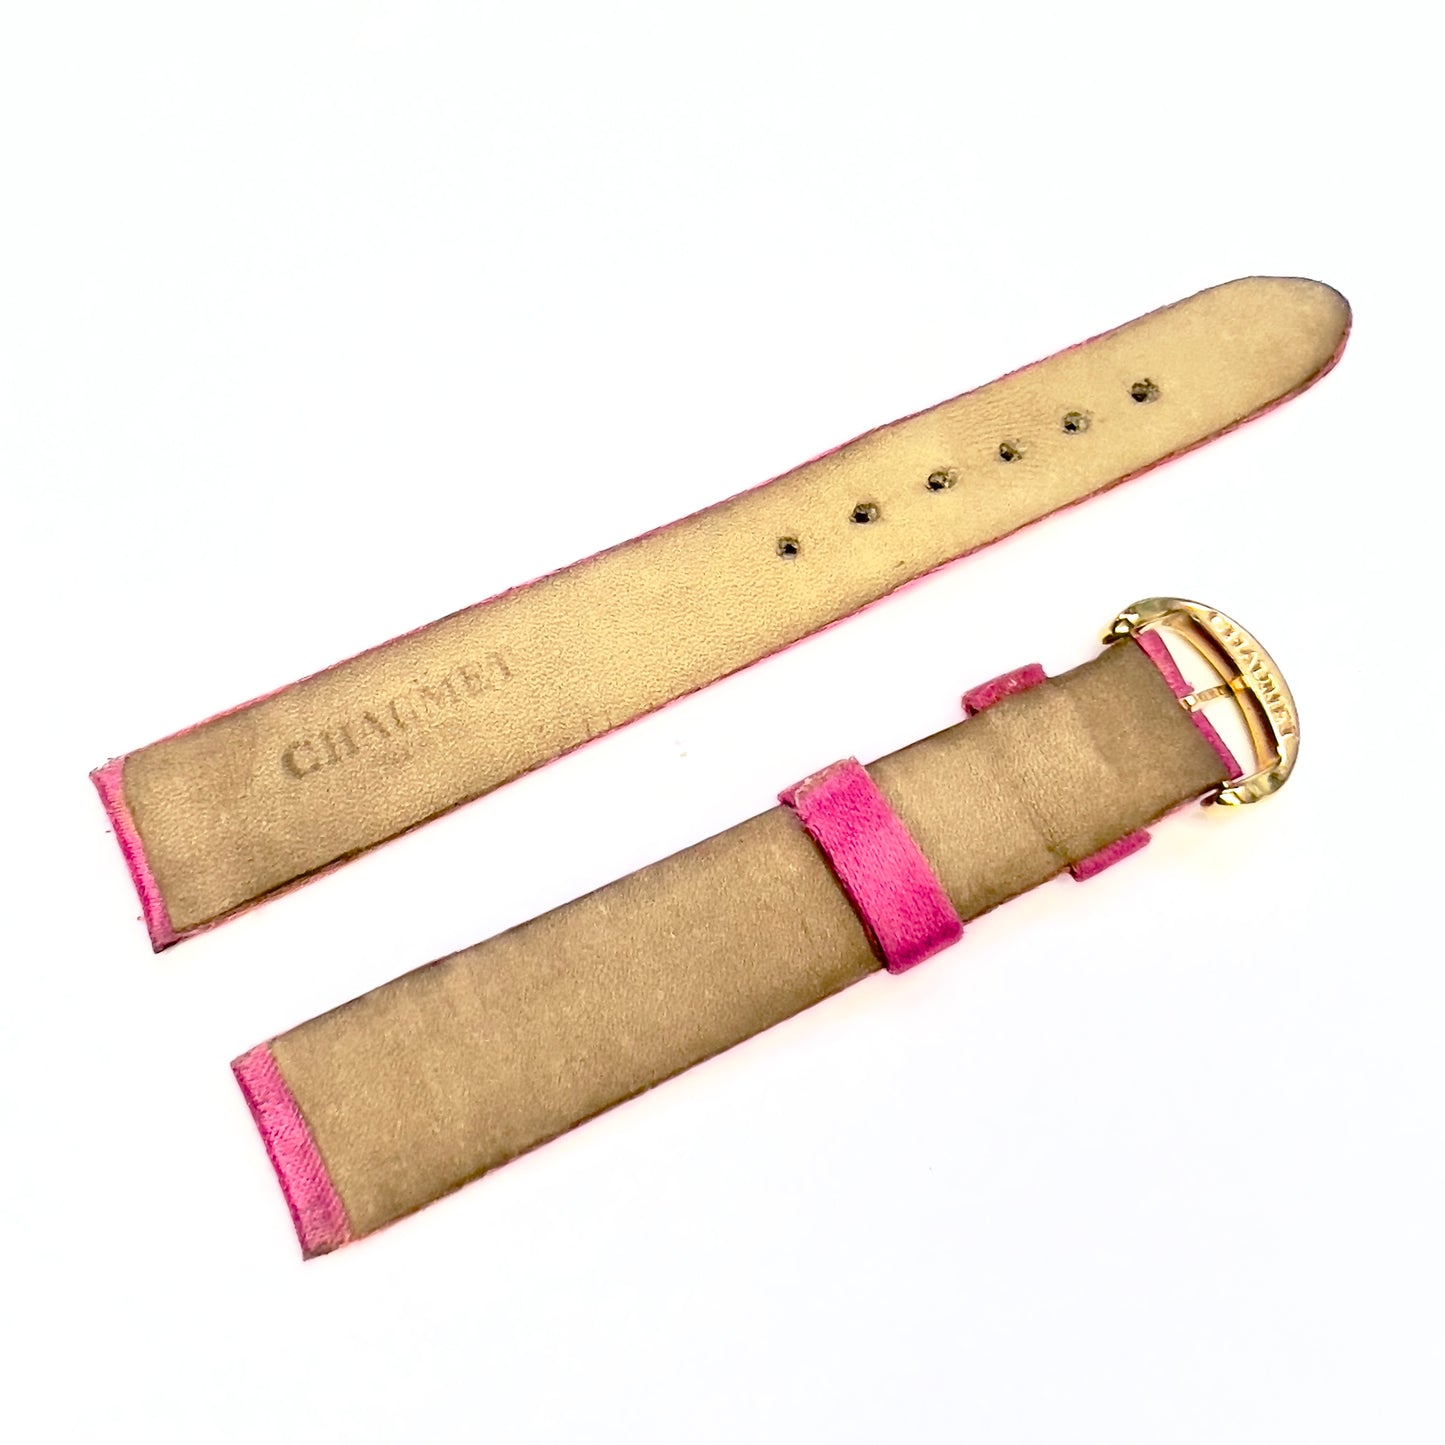 CHAUMET Pink Satin/Leather Band Strap with Gold Plated Chaumet BUCKLE